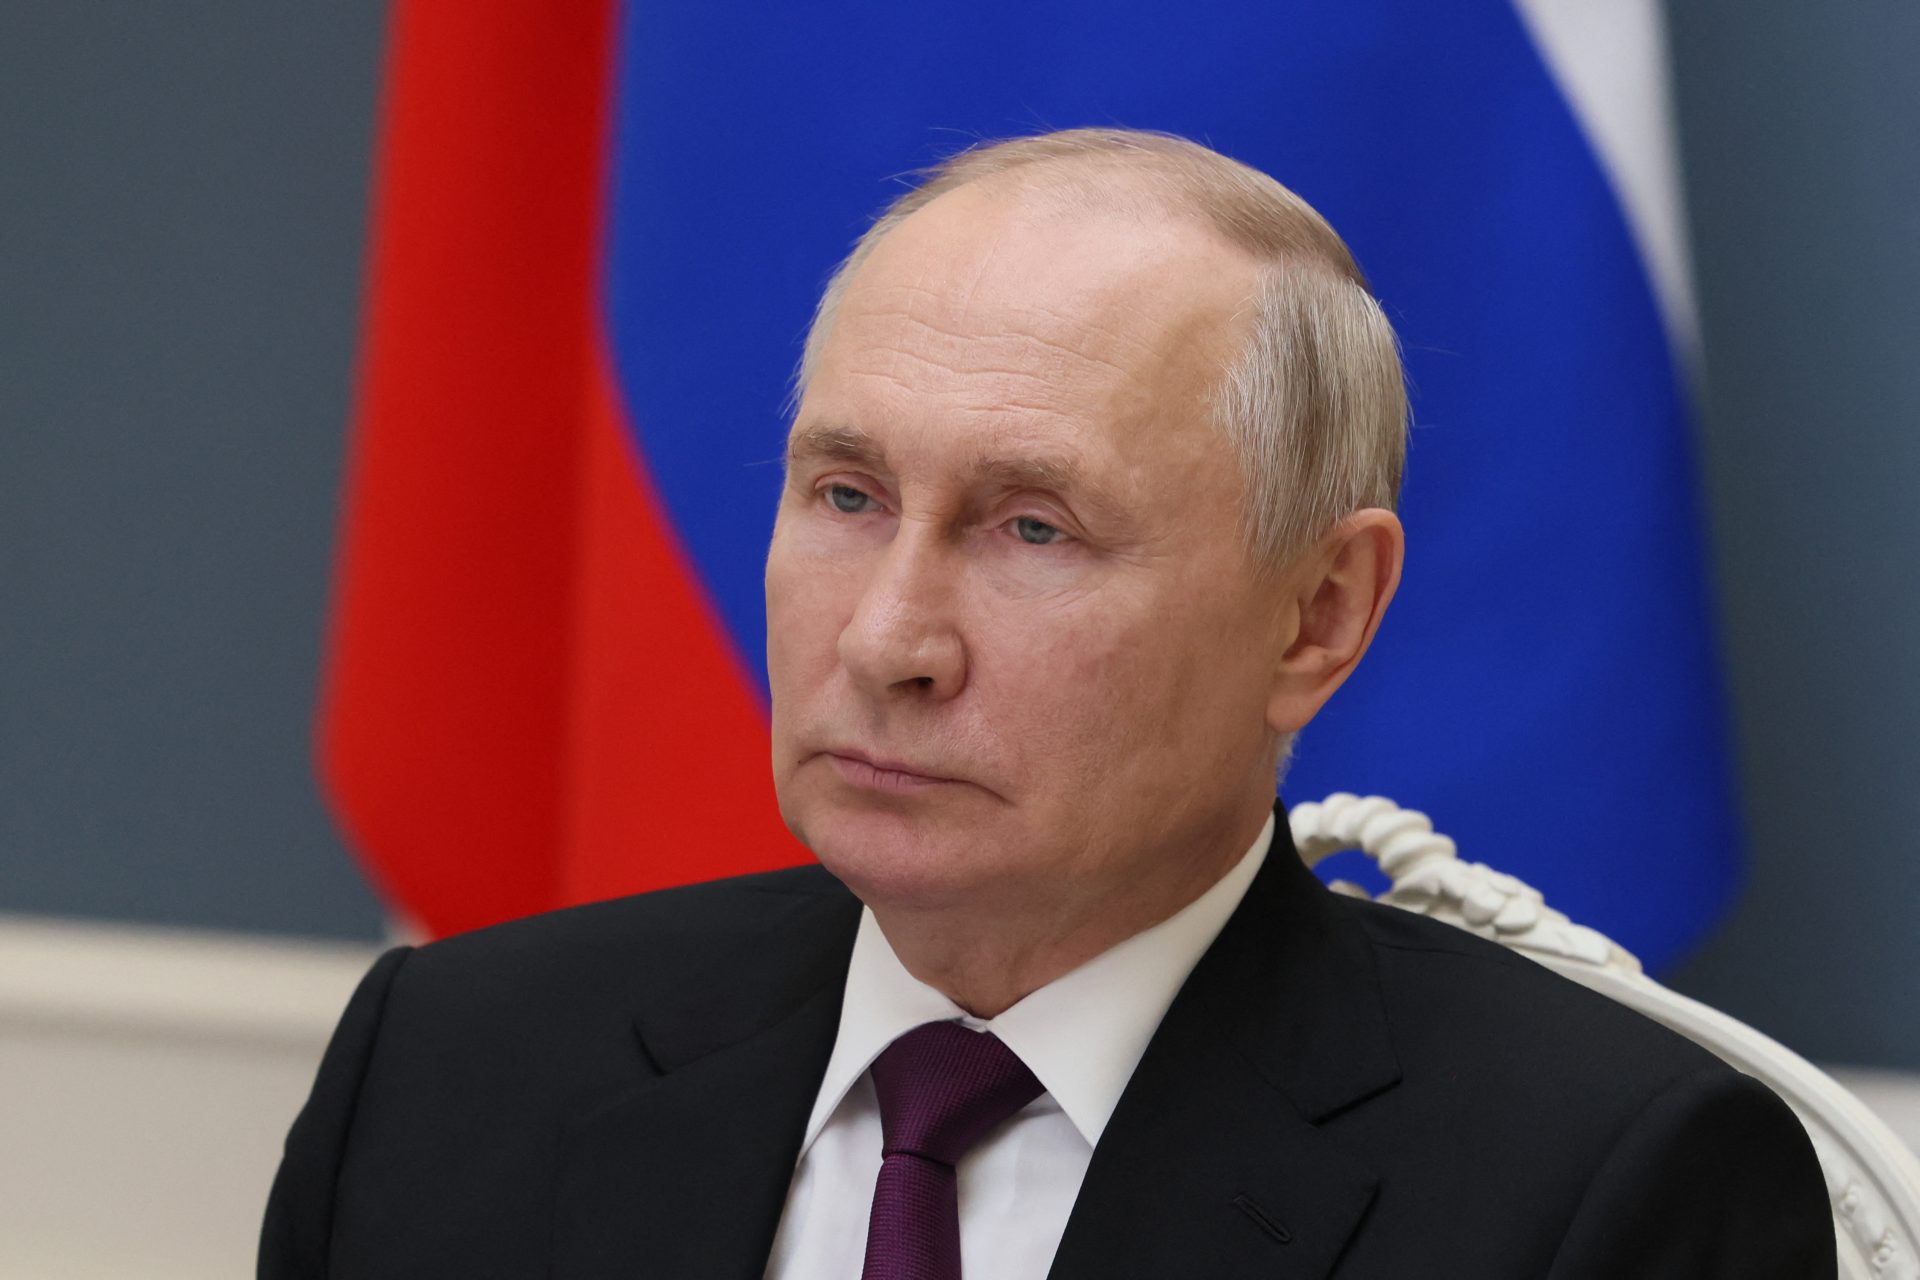 Should you be worried about Putin’s latest nuclear threats?